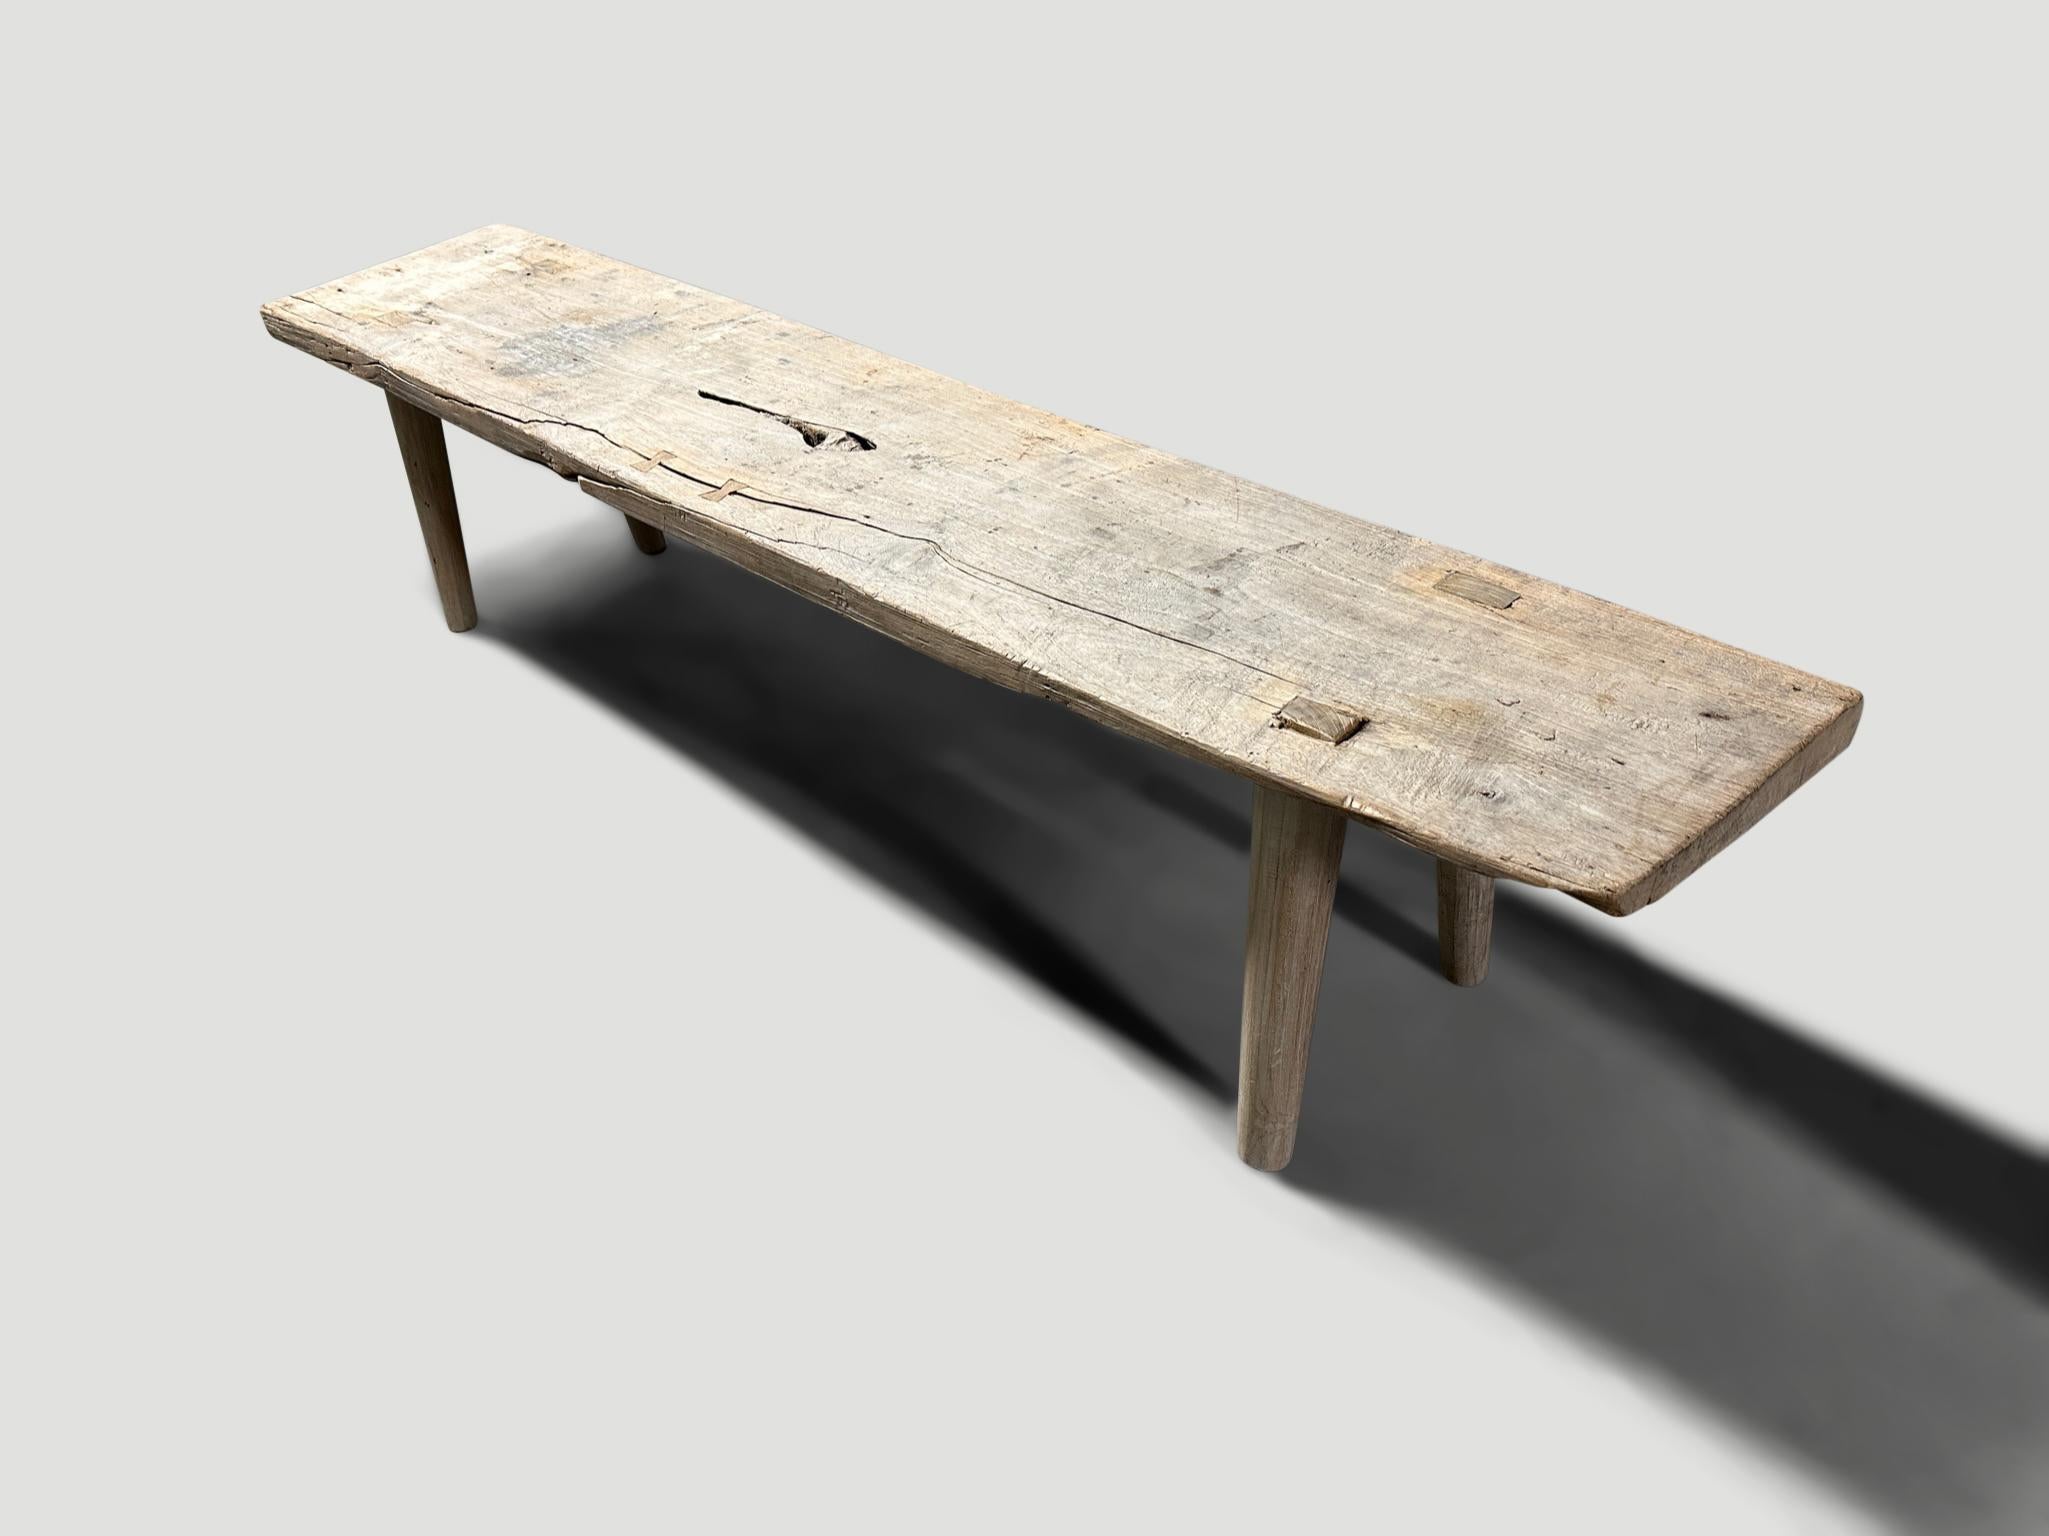 Antique Wabi Sabi bench with pale wood tones. A single wide aged teak slab celebrating the cracks and crevices and all the other marks that time and loving use have left behind. We added smooth teak minimalist legs and butterflies inlaid into the